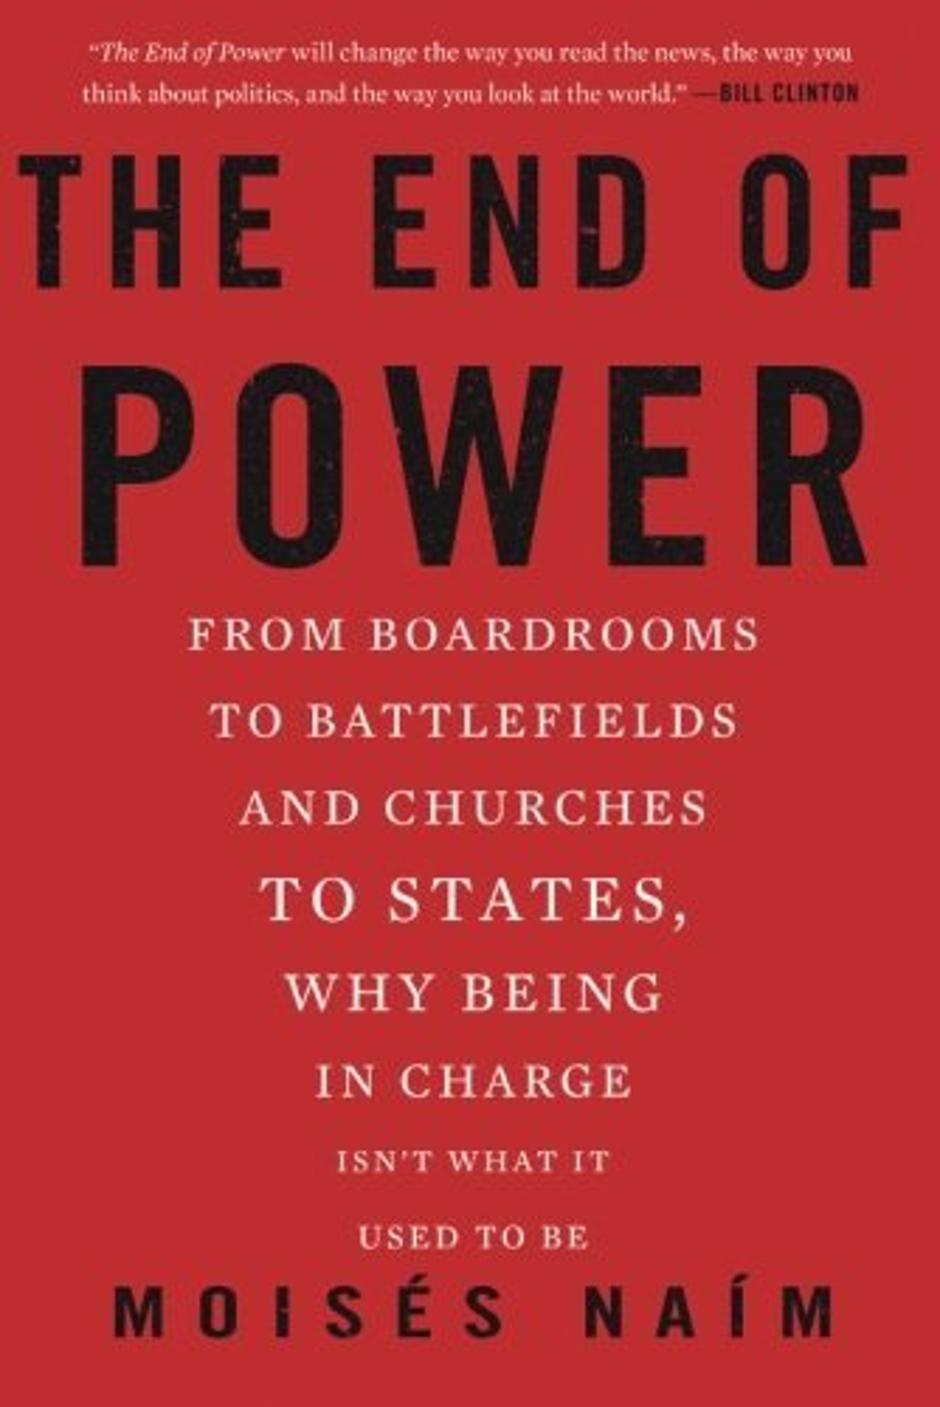 The end of power | Author: Amazon